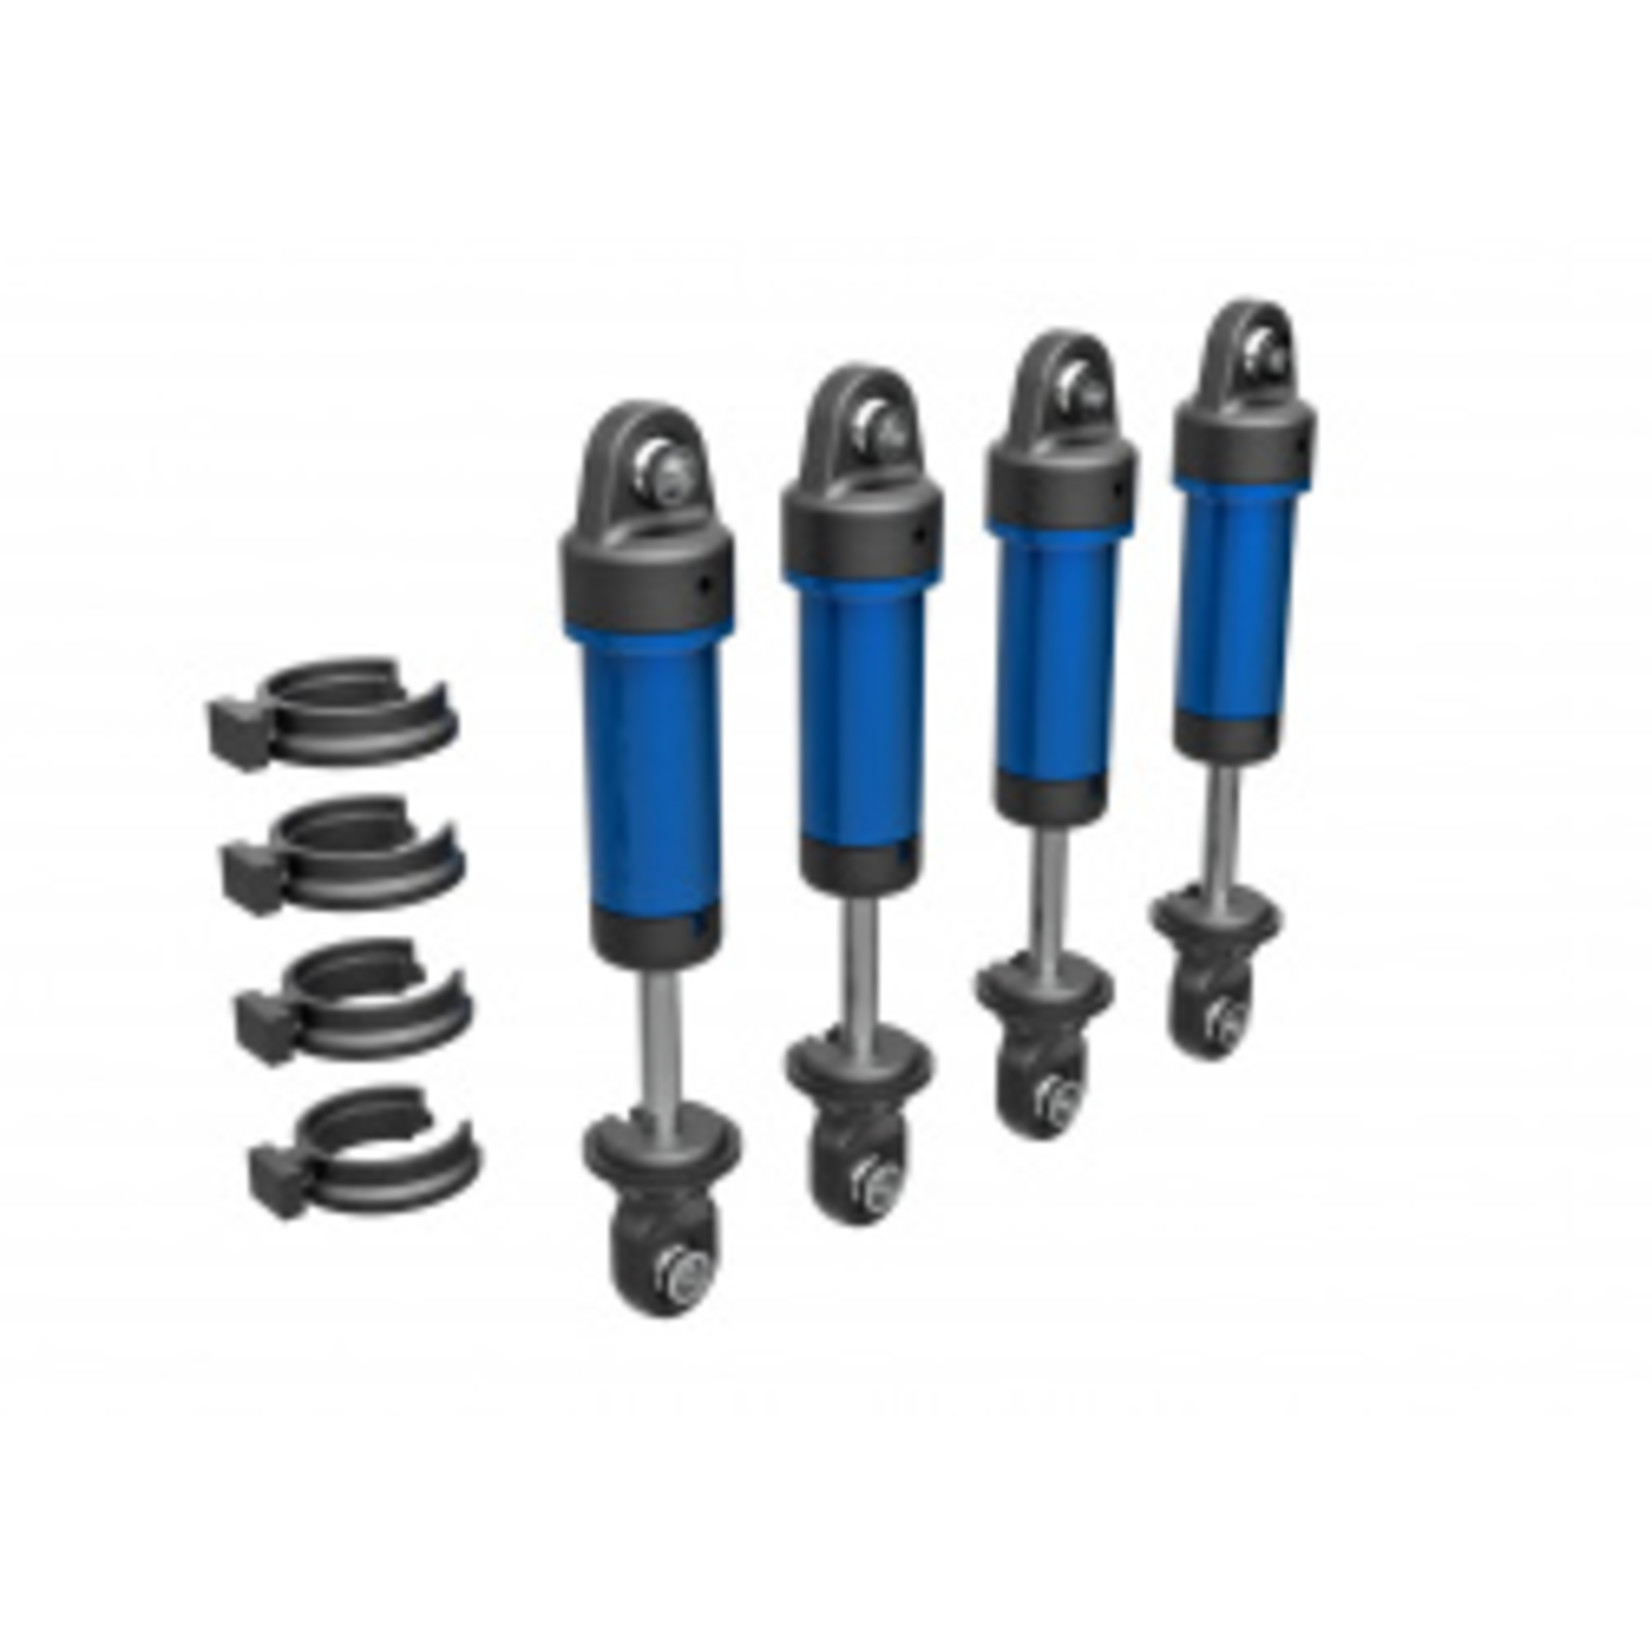 Traxxas 9764-BLUE Shocks, GTM, 6061-T6 aluminum (blue-anodized) (fully assembled w/o springs) (4)